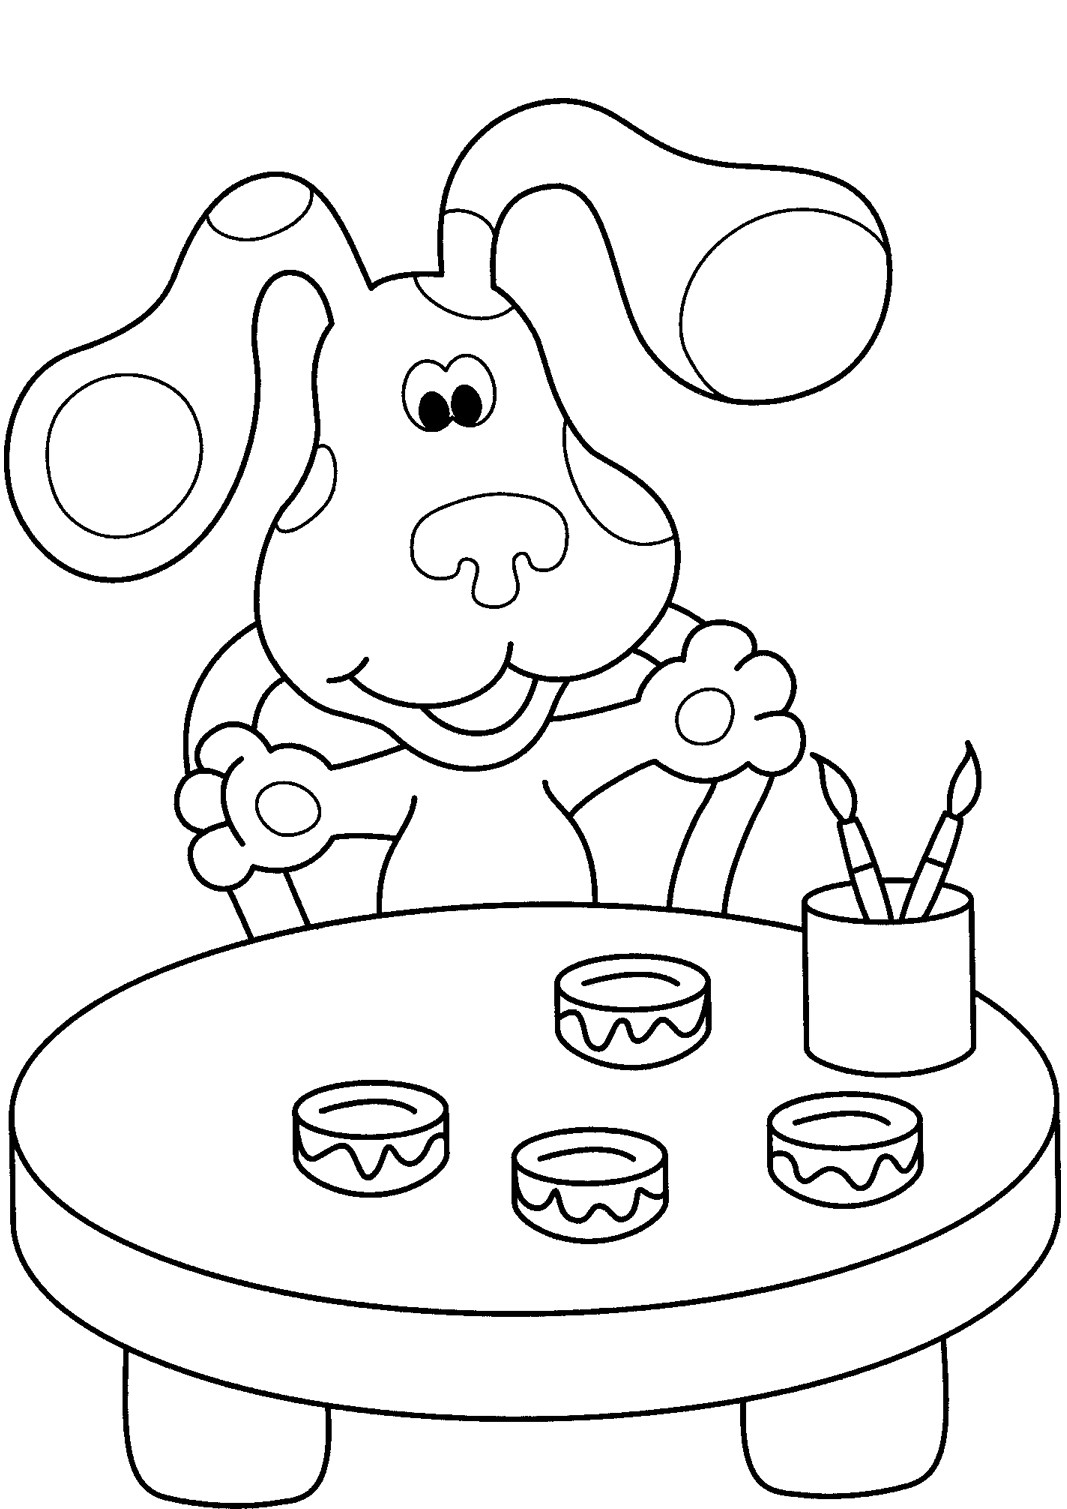 Toddler Coloring Pages
 Free Printable Blues Clues Coloring Pages For Kids